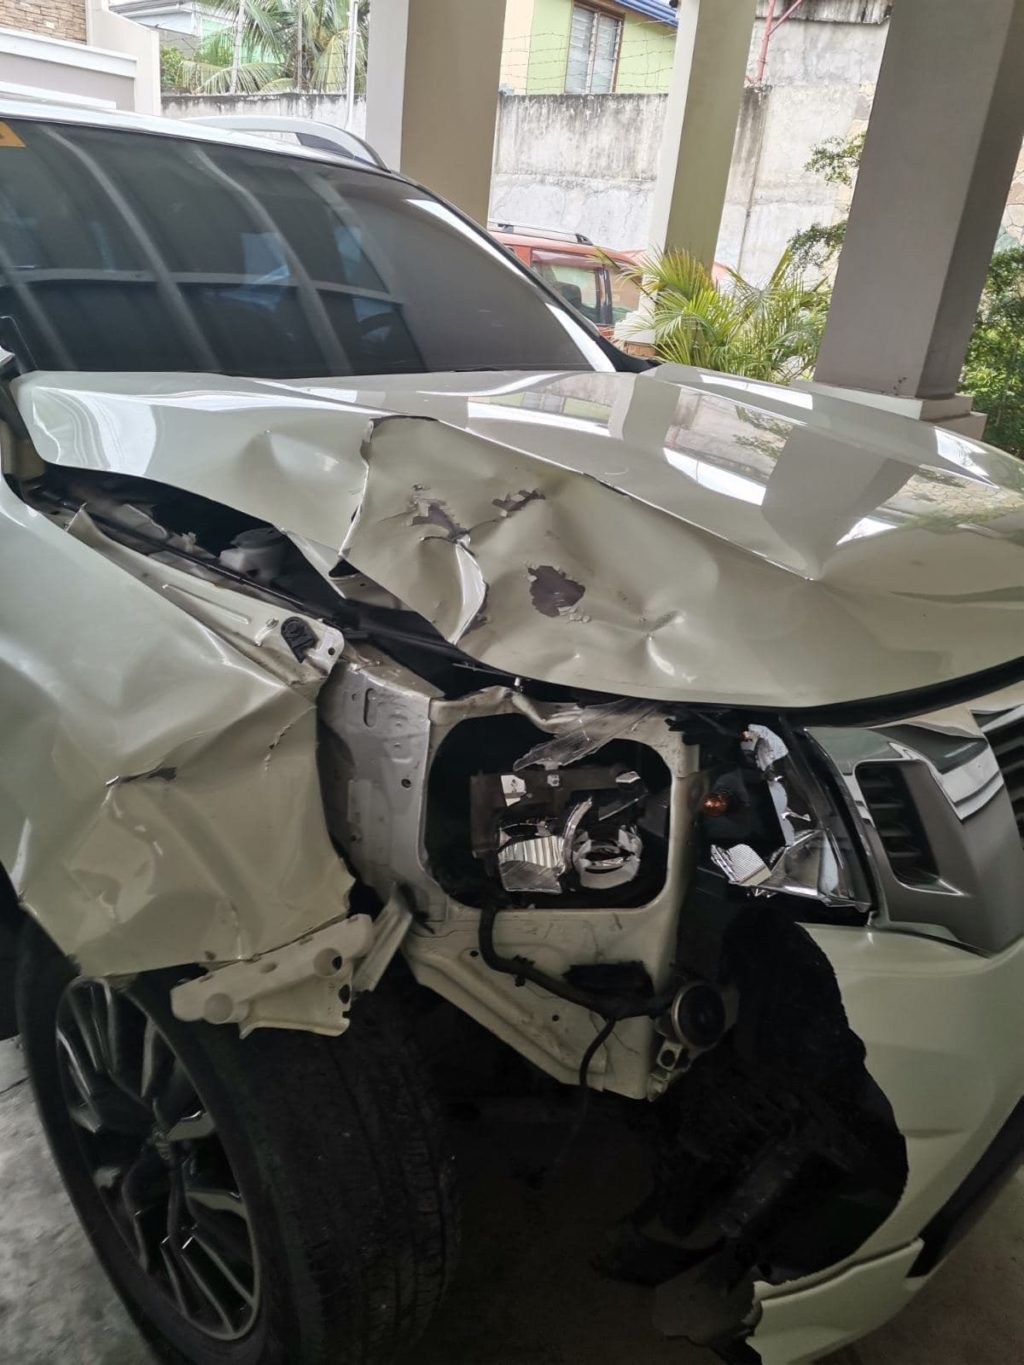 The right side of the pickup truck of Joseph Elgie Gentapa is damaged after the road accident involving cyclist, Jose Romilo Blanco. The cyclist died in the accident. | Photo courtesy of the Naga City Police Station